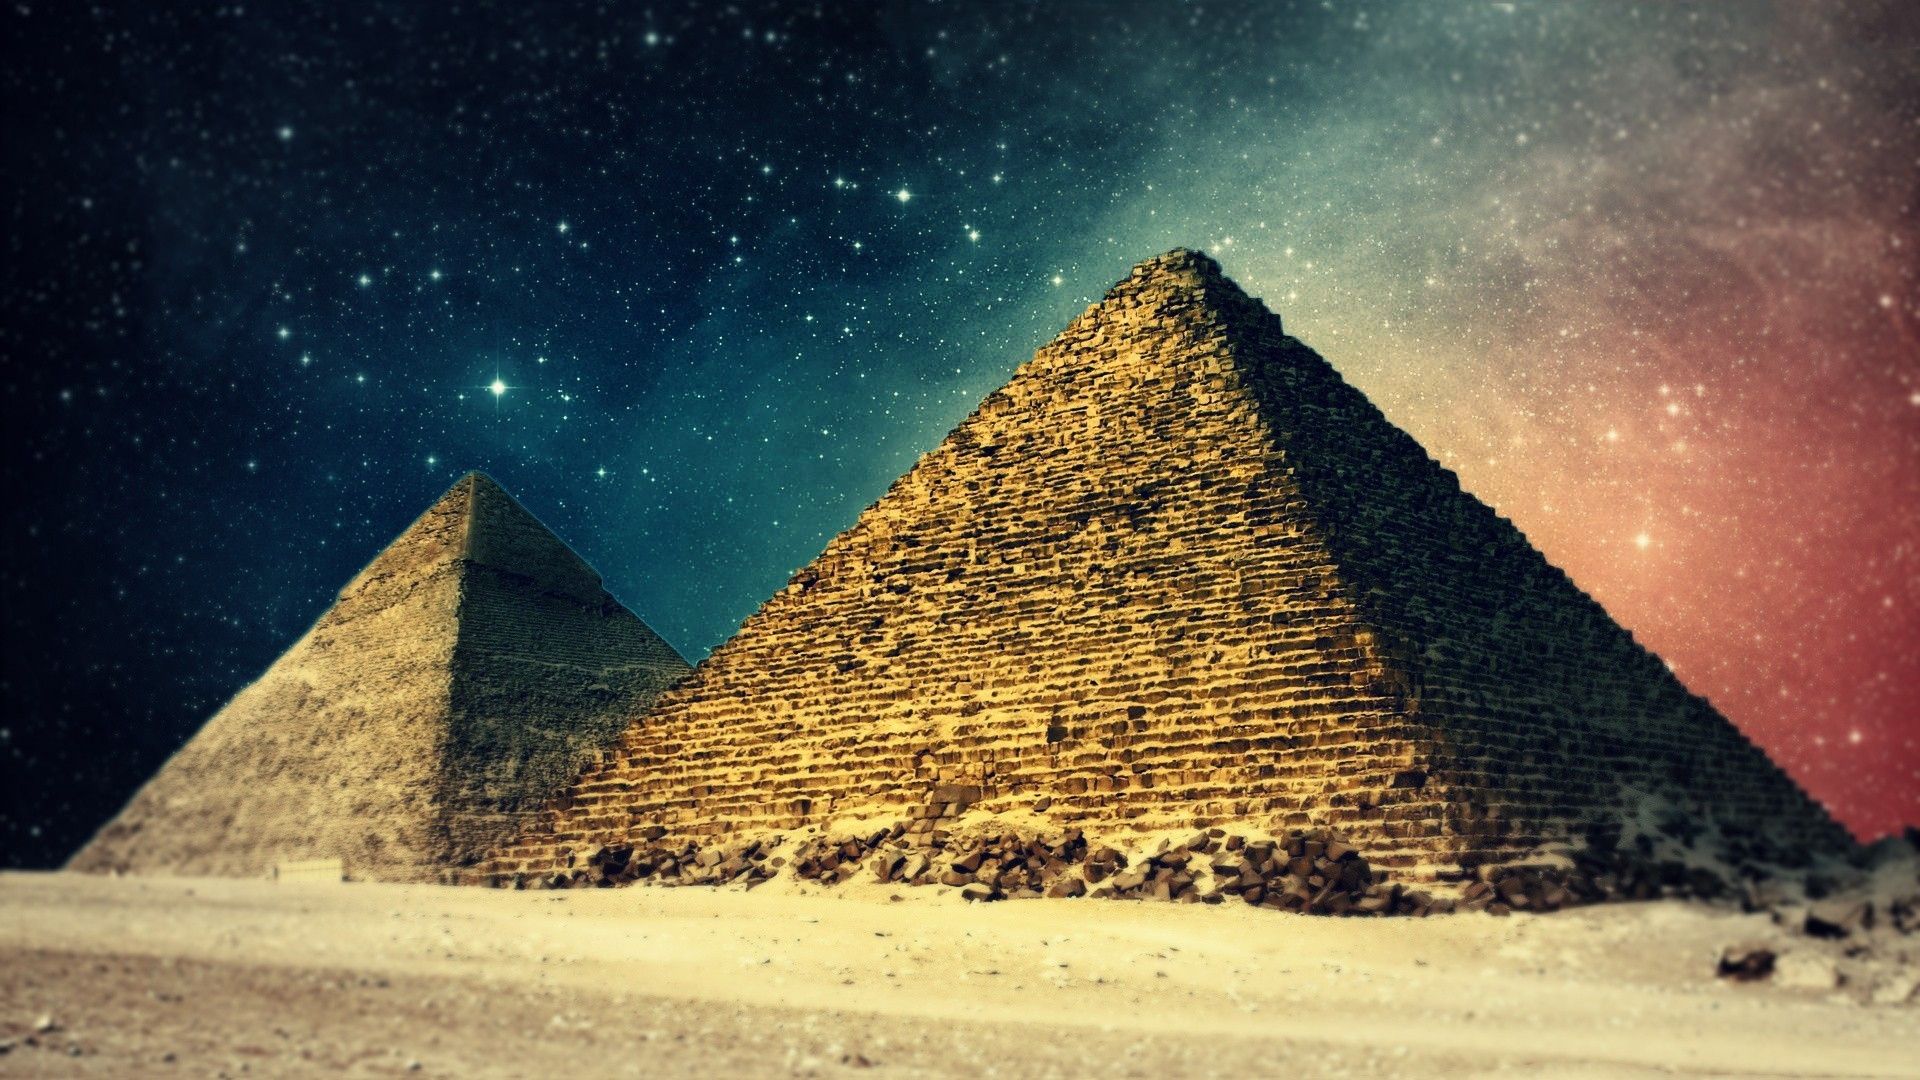 Egyptian Wallpaper Image With Great Pyramid Of